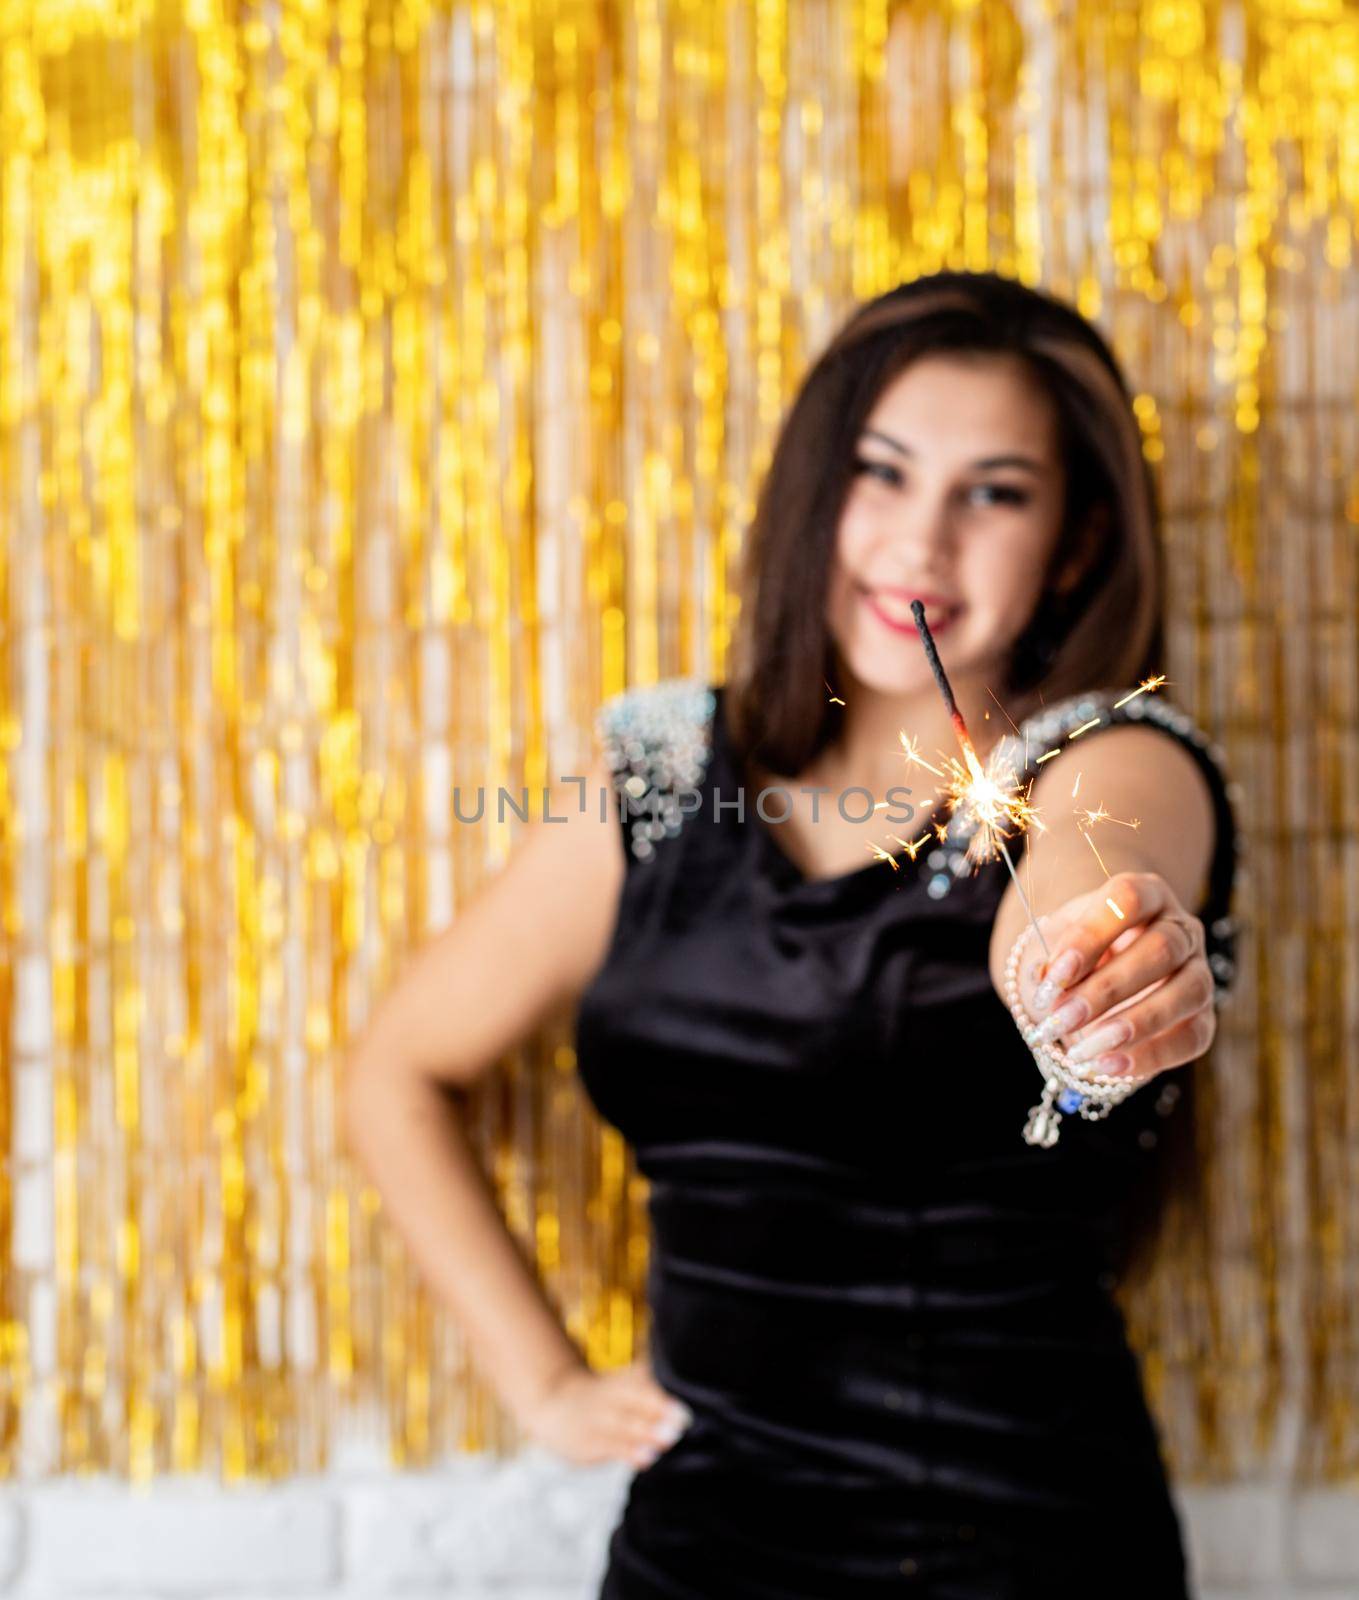 Beautiful young woman holding sparkler and balloon on golden background by Desperada